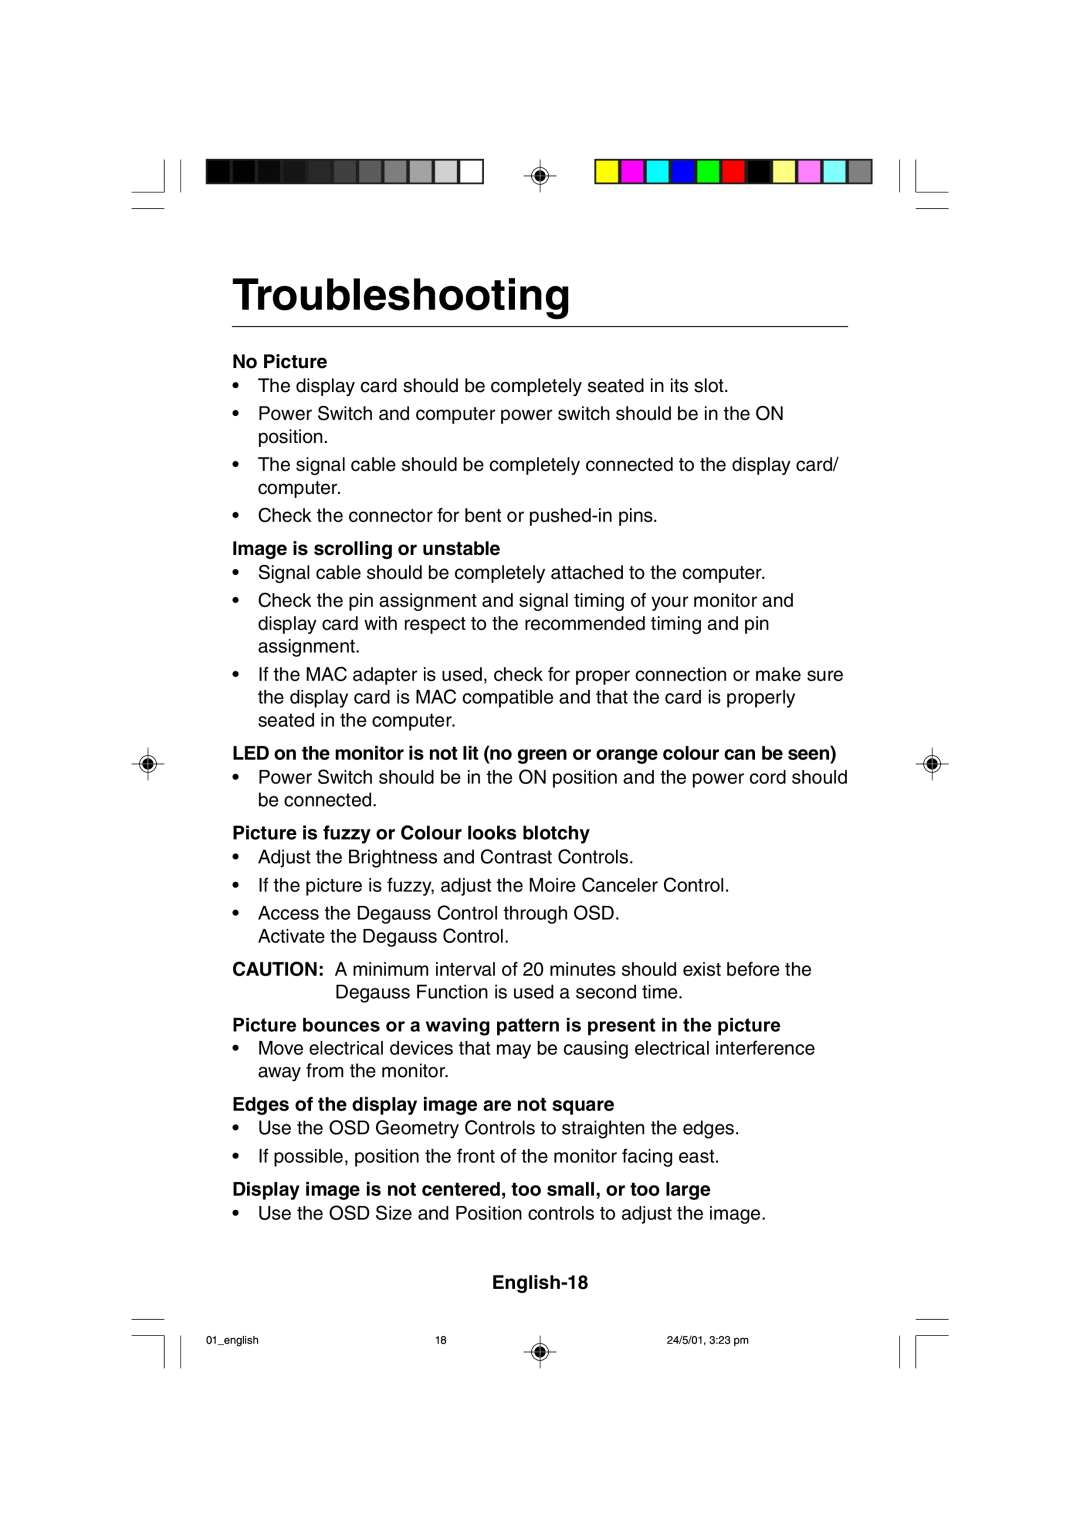 Mitsubishi Electronics M557 user manual Troubleshooting, No Picture, Image is scrolling or unstable, English-18 